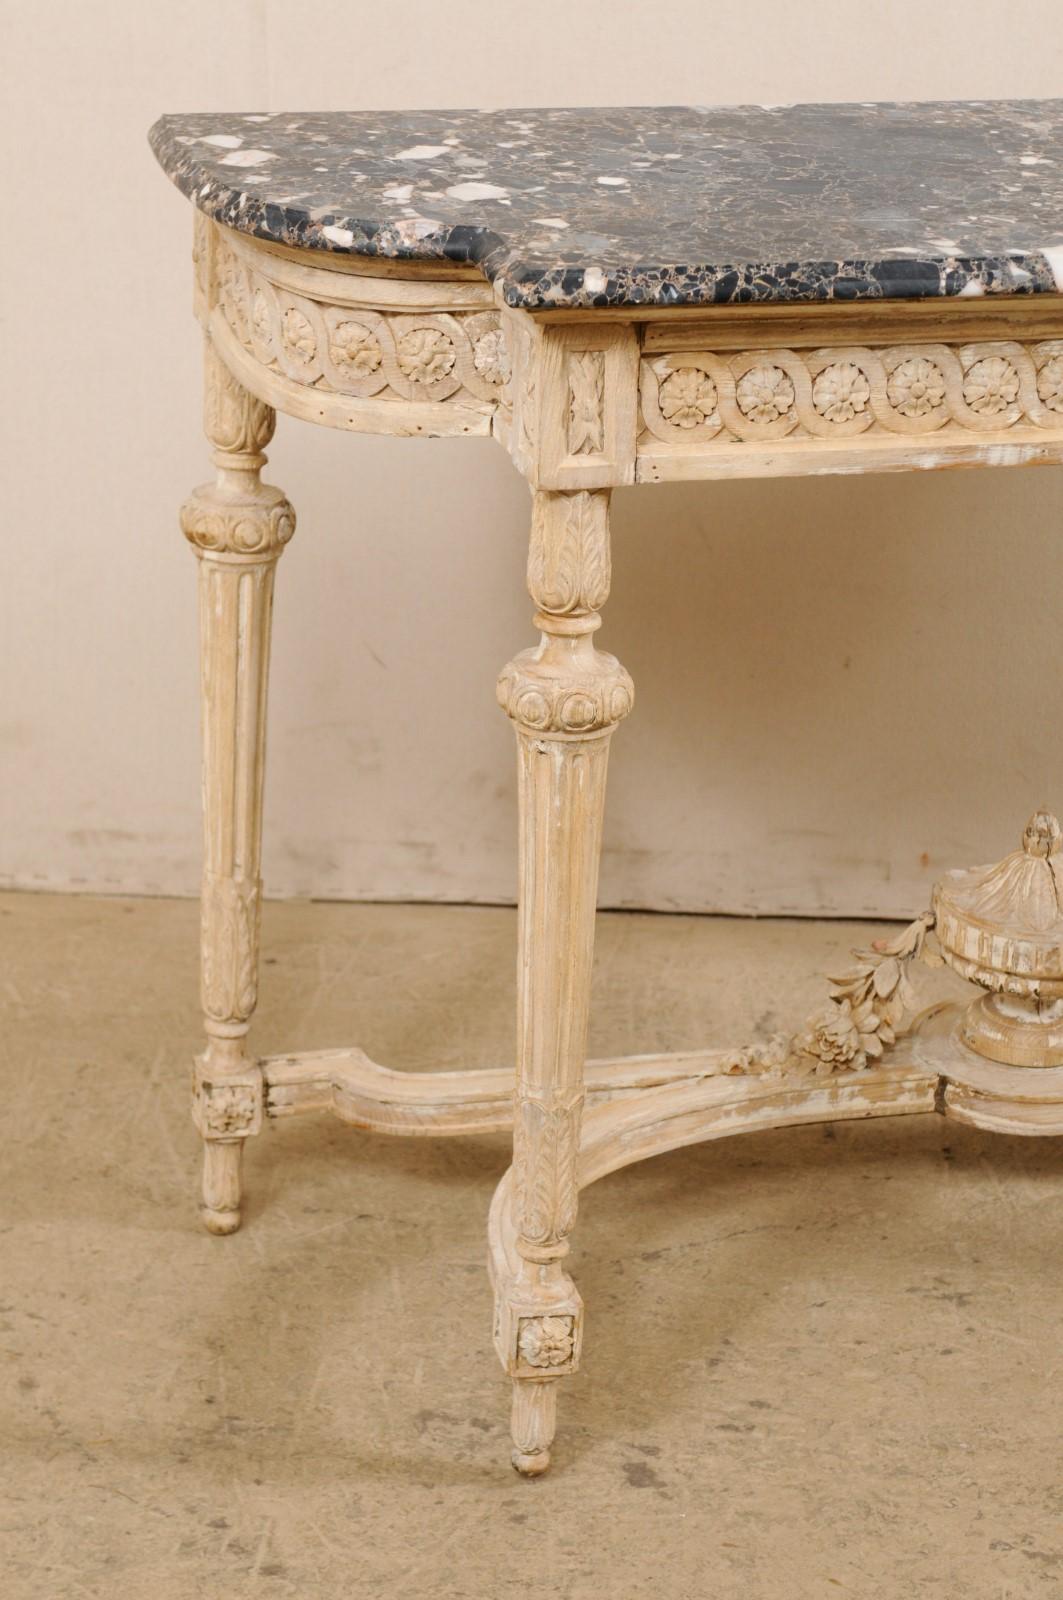 Antique French Marble-Top Console Table with Carved Urn & Foliage at Underside 4